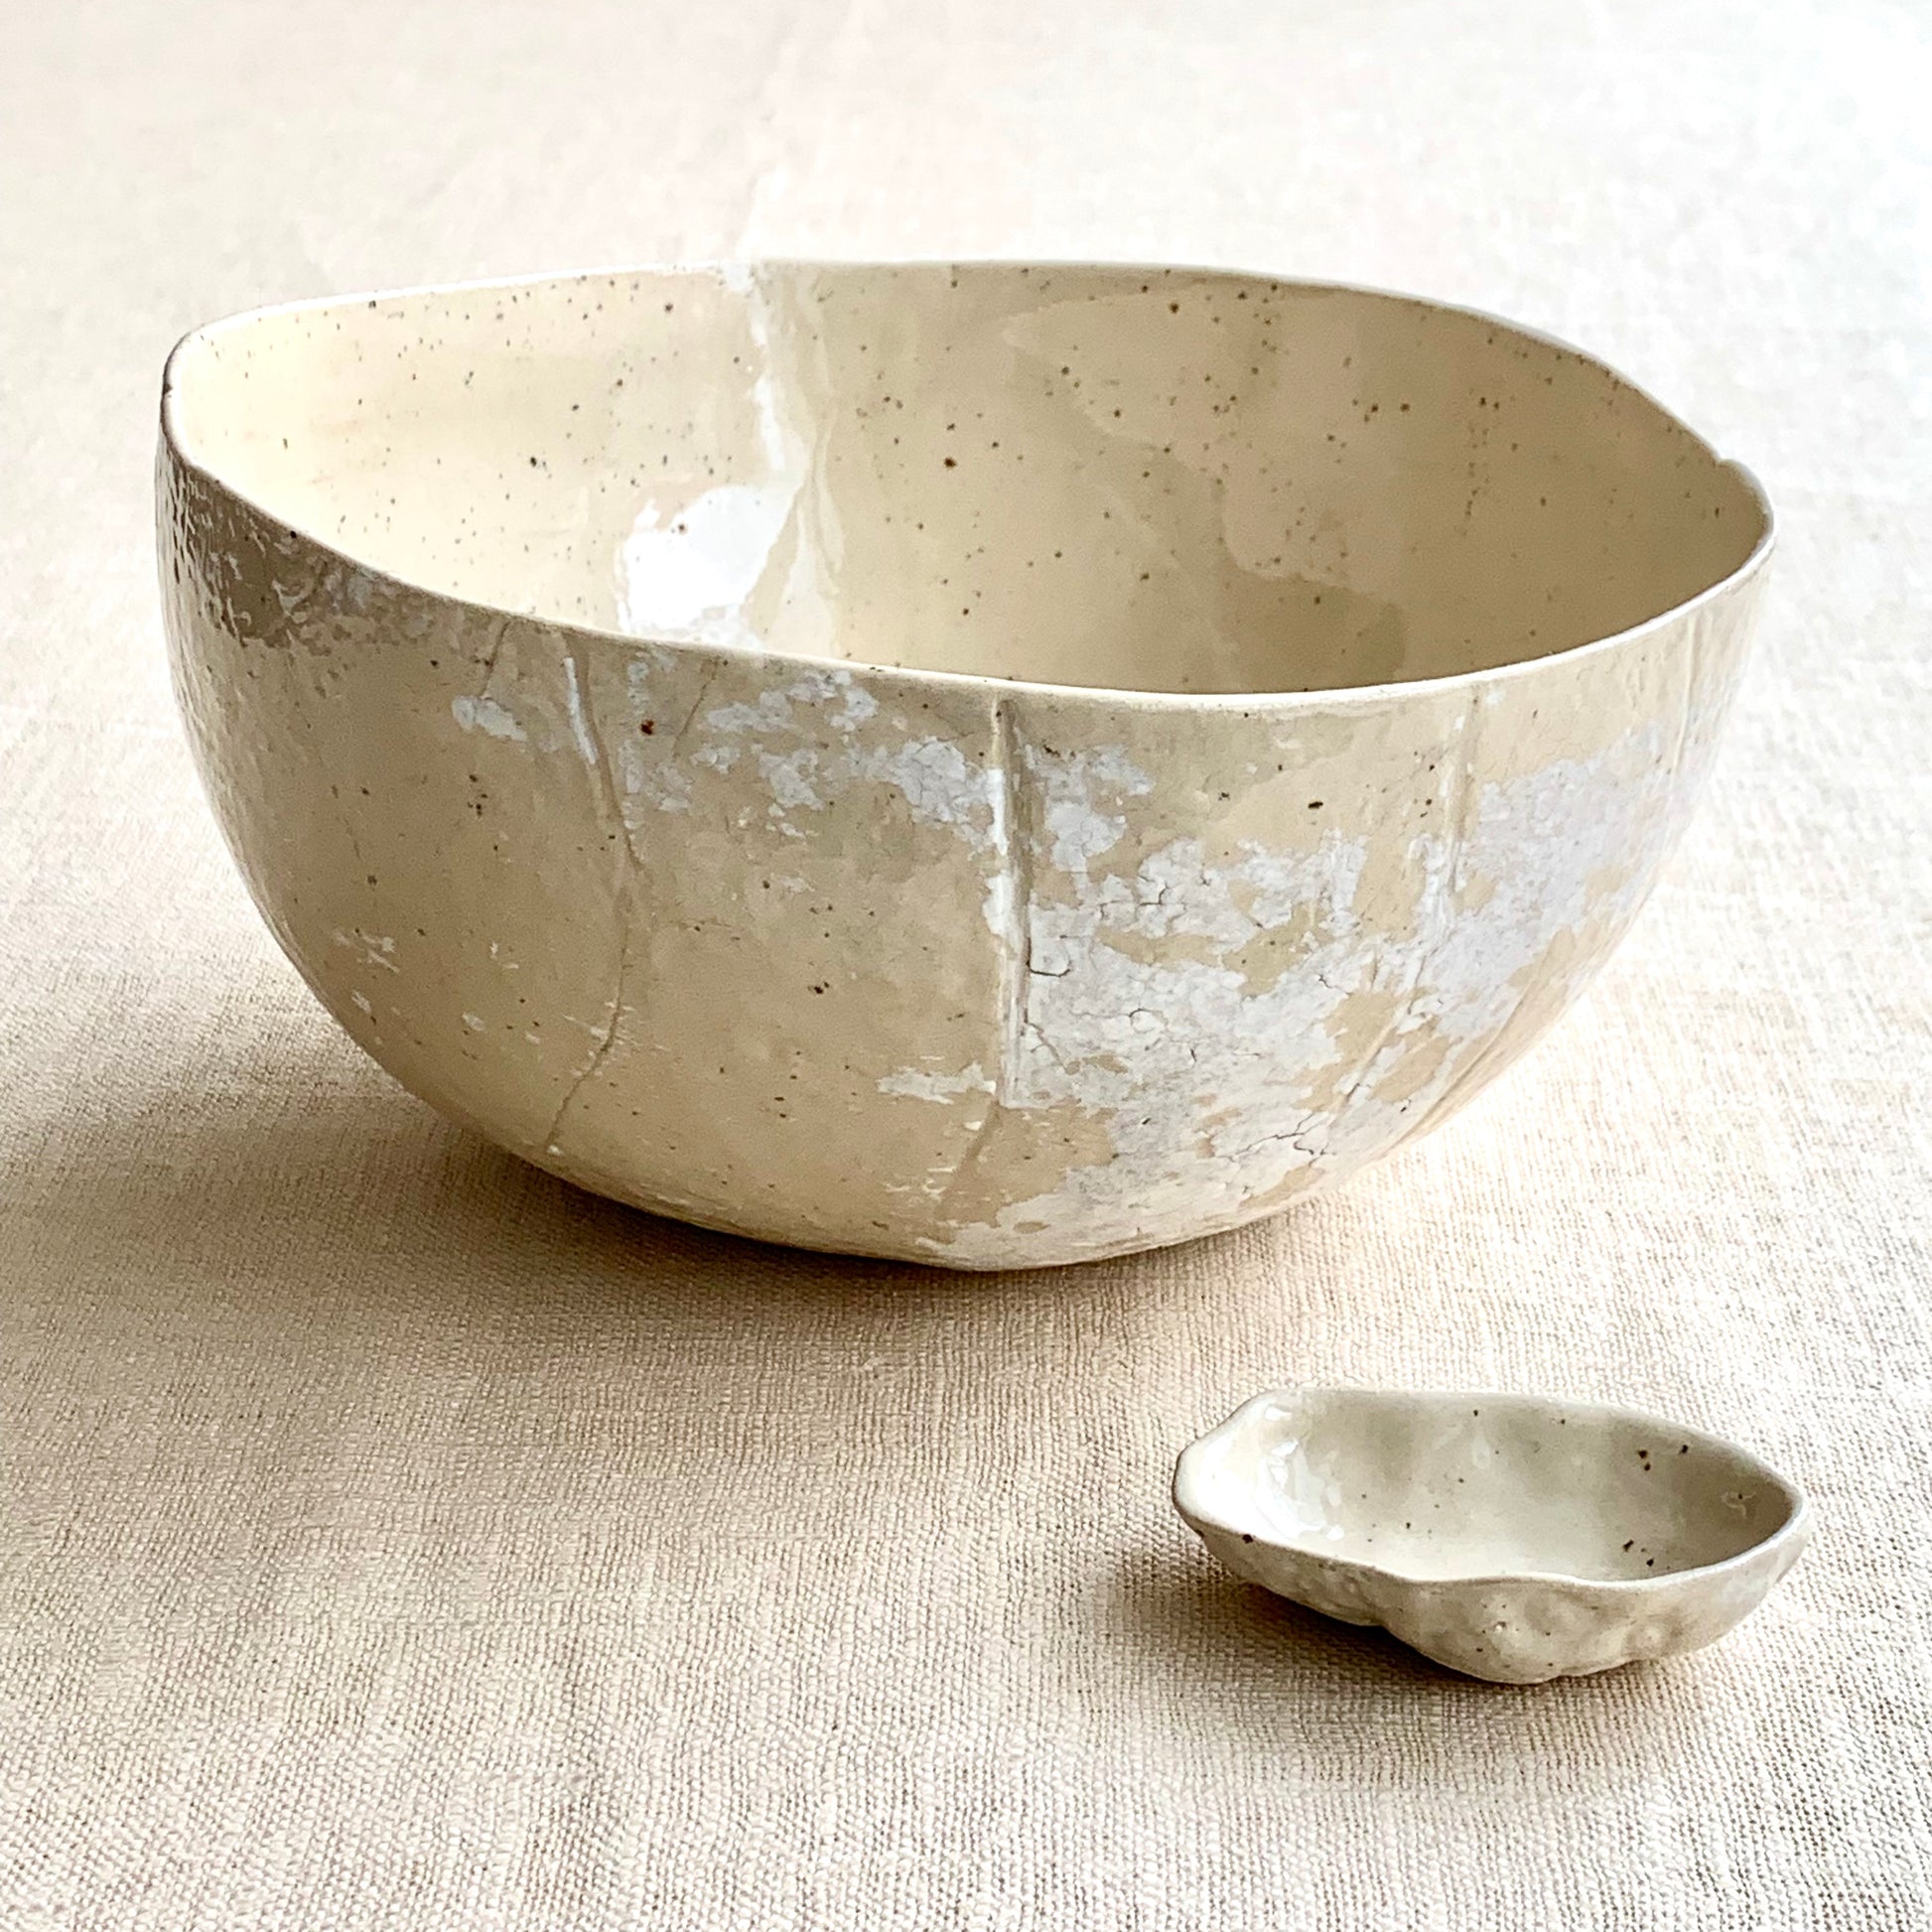 Unique handmade natural ceramic bowl from the Amazon collection. This extra large bowl made of speckled clay enriches your table setting with an authentic natural feel or will surprise someone as a personal ceramic gift. A one of a kind signature piece of tableware with a unique design and white porcelain slib